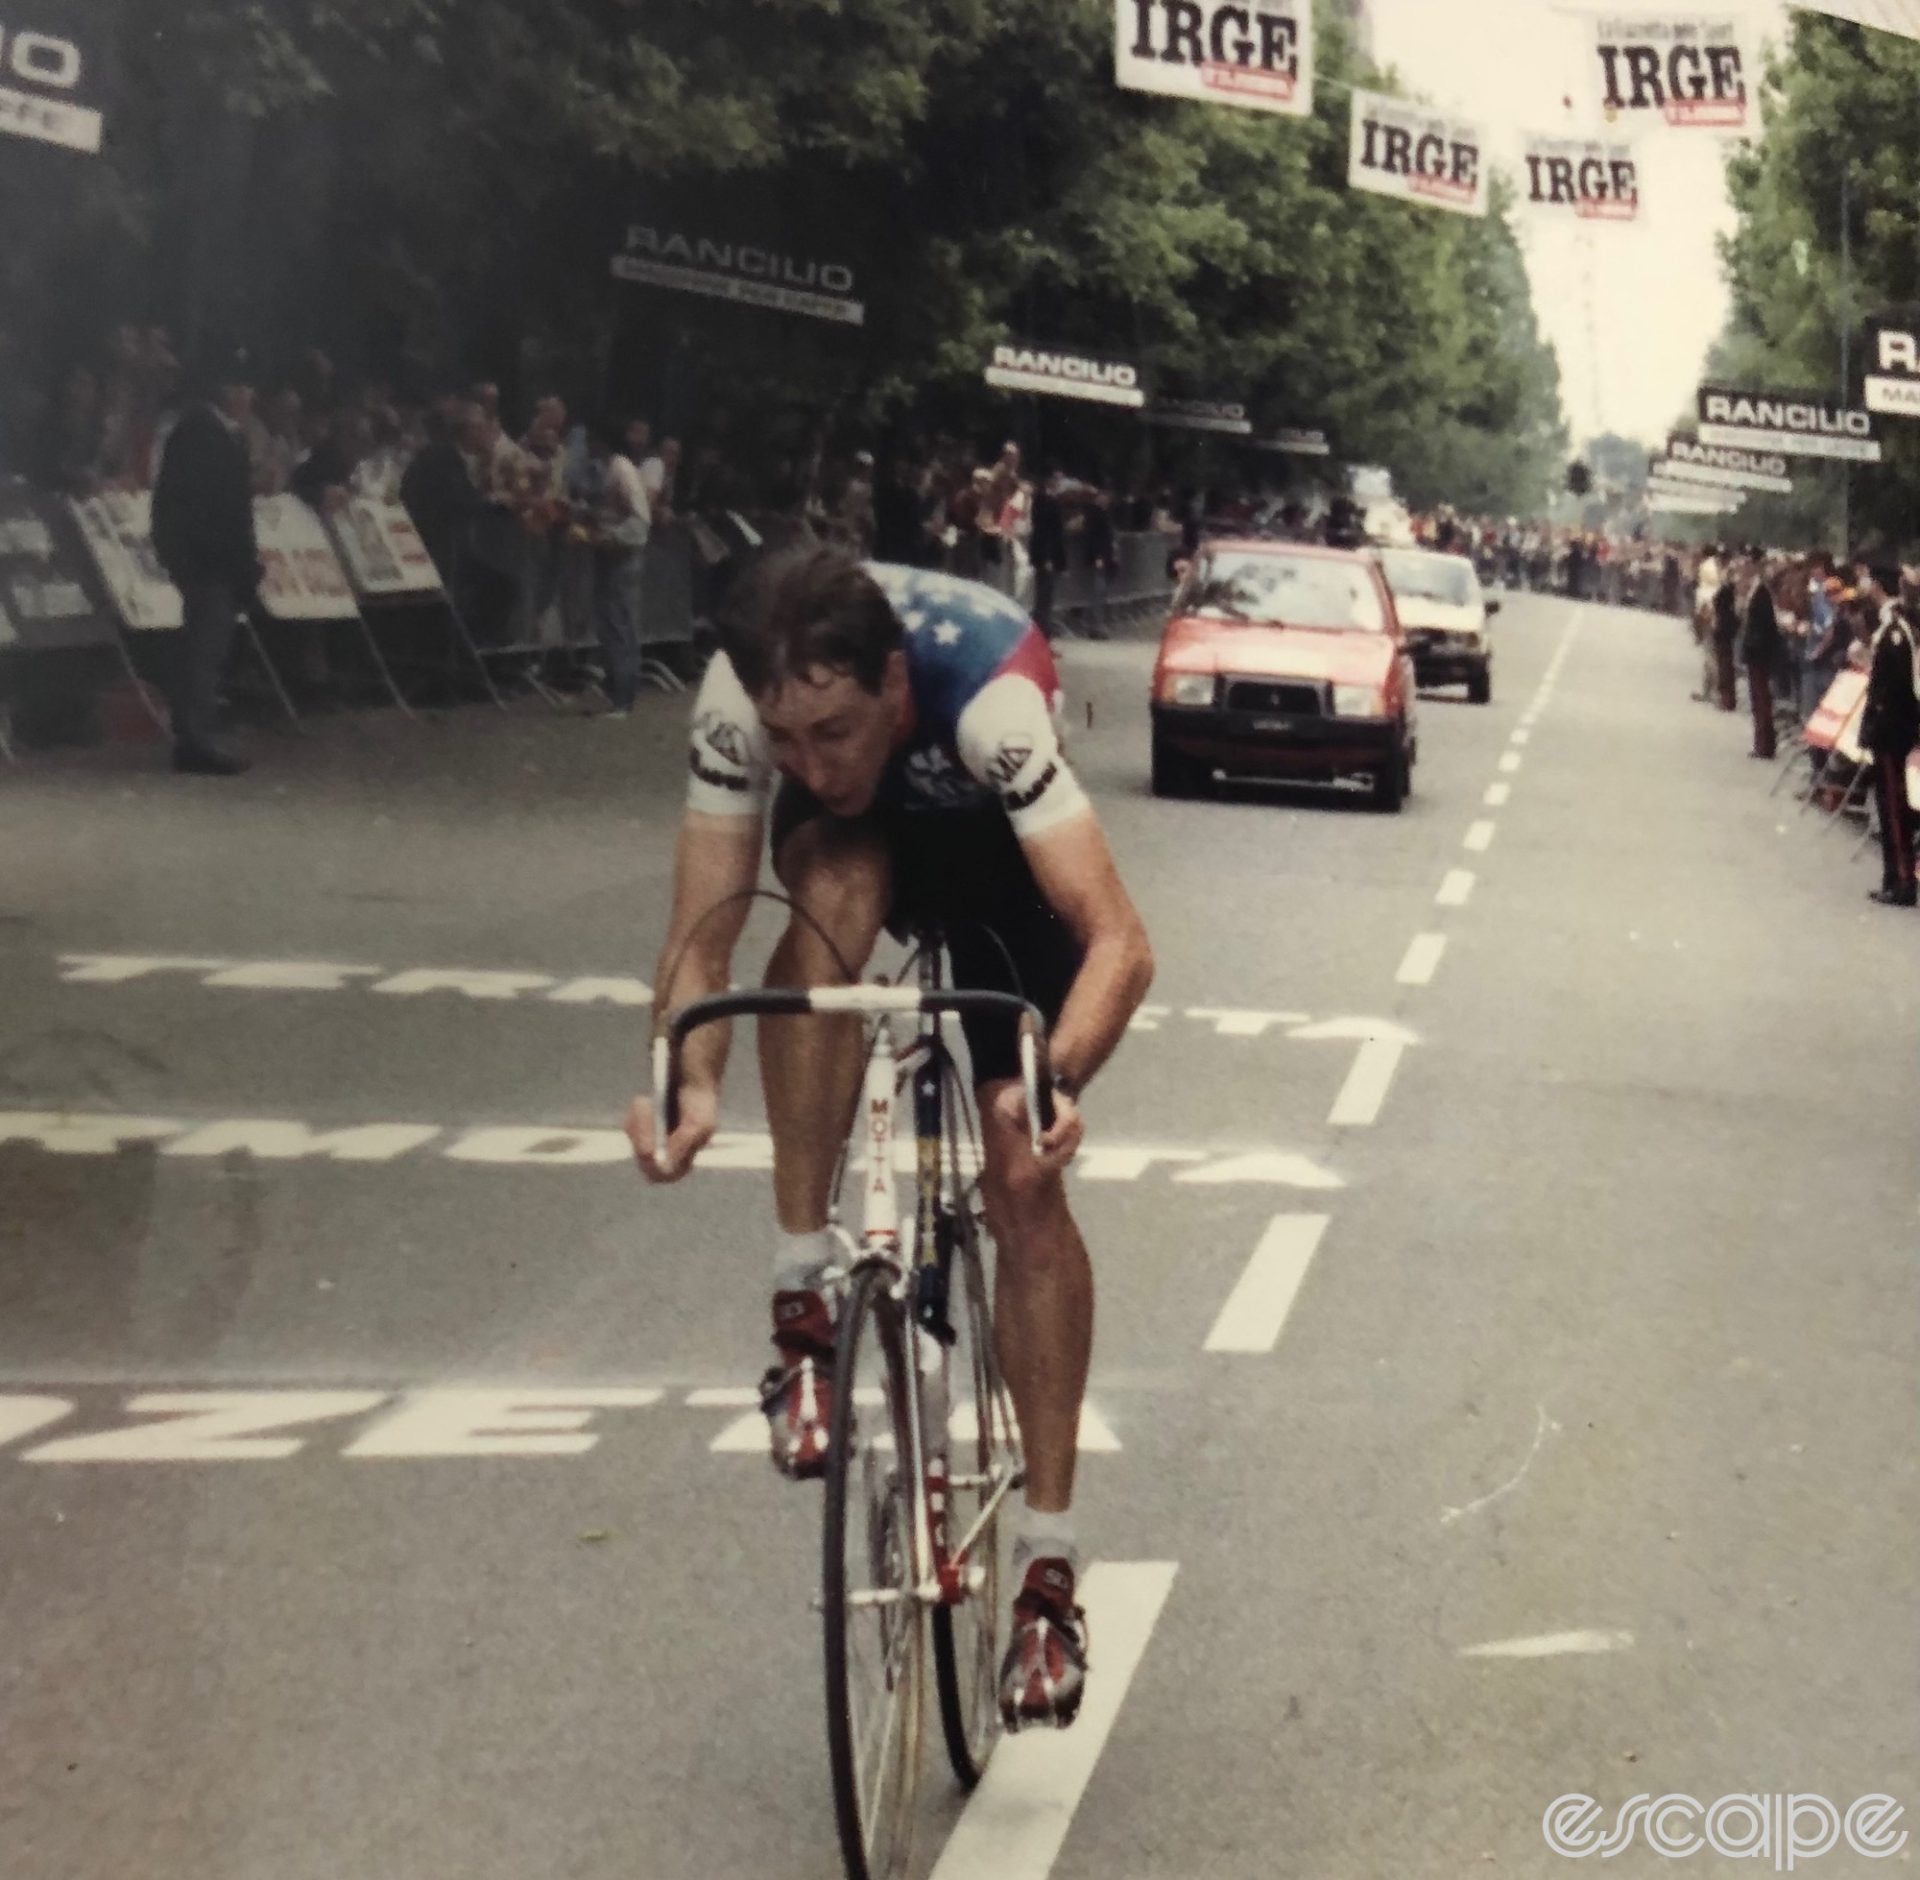 Tim Rutledge races a time trial at the 1984 Giro. He's alone on the road, with fans crowded behind barriers and two cars following behind. There is a look of intense suffering on his face.